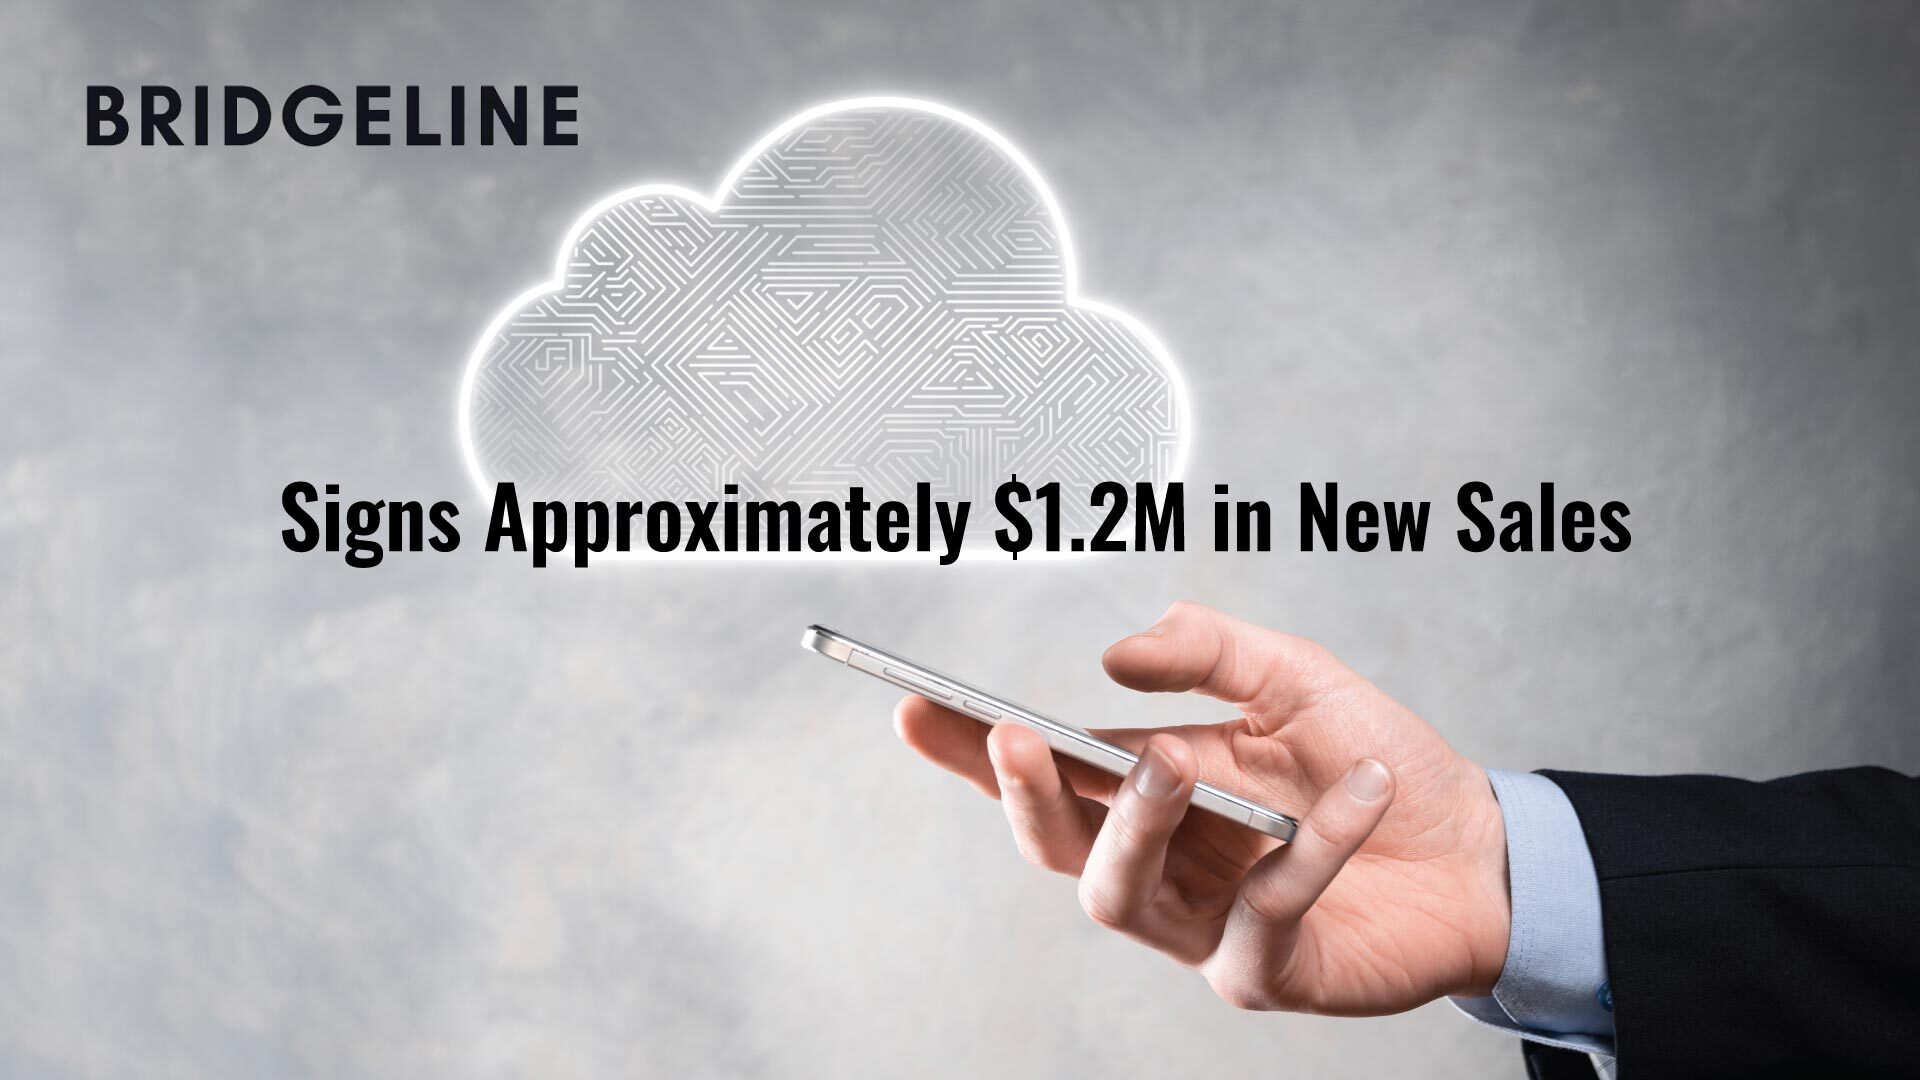 Bridgeline Signs Approximately $1.2M in New Sales in its Third Quarter of Fiscal 2023